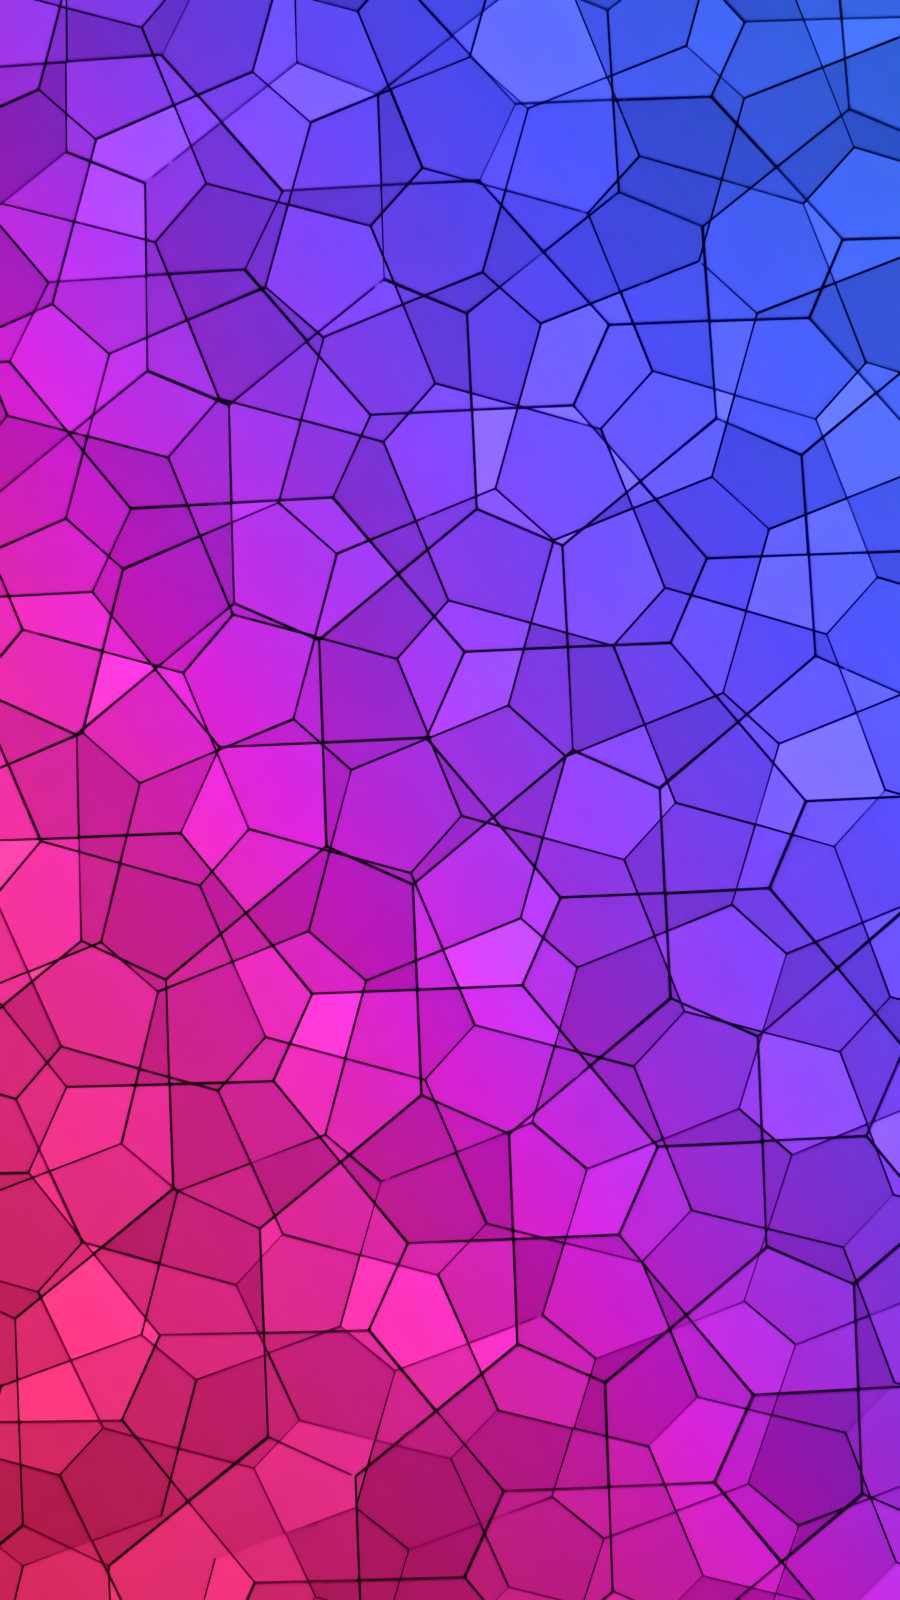 Geomatric Patterns Abstract iPhone Wallpaper